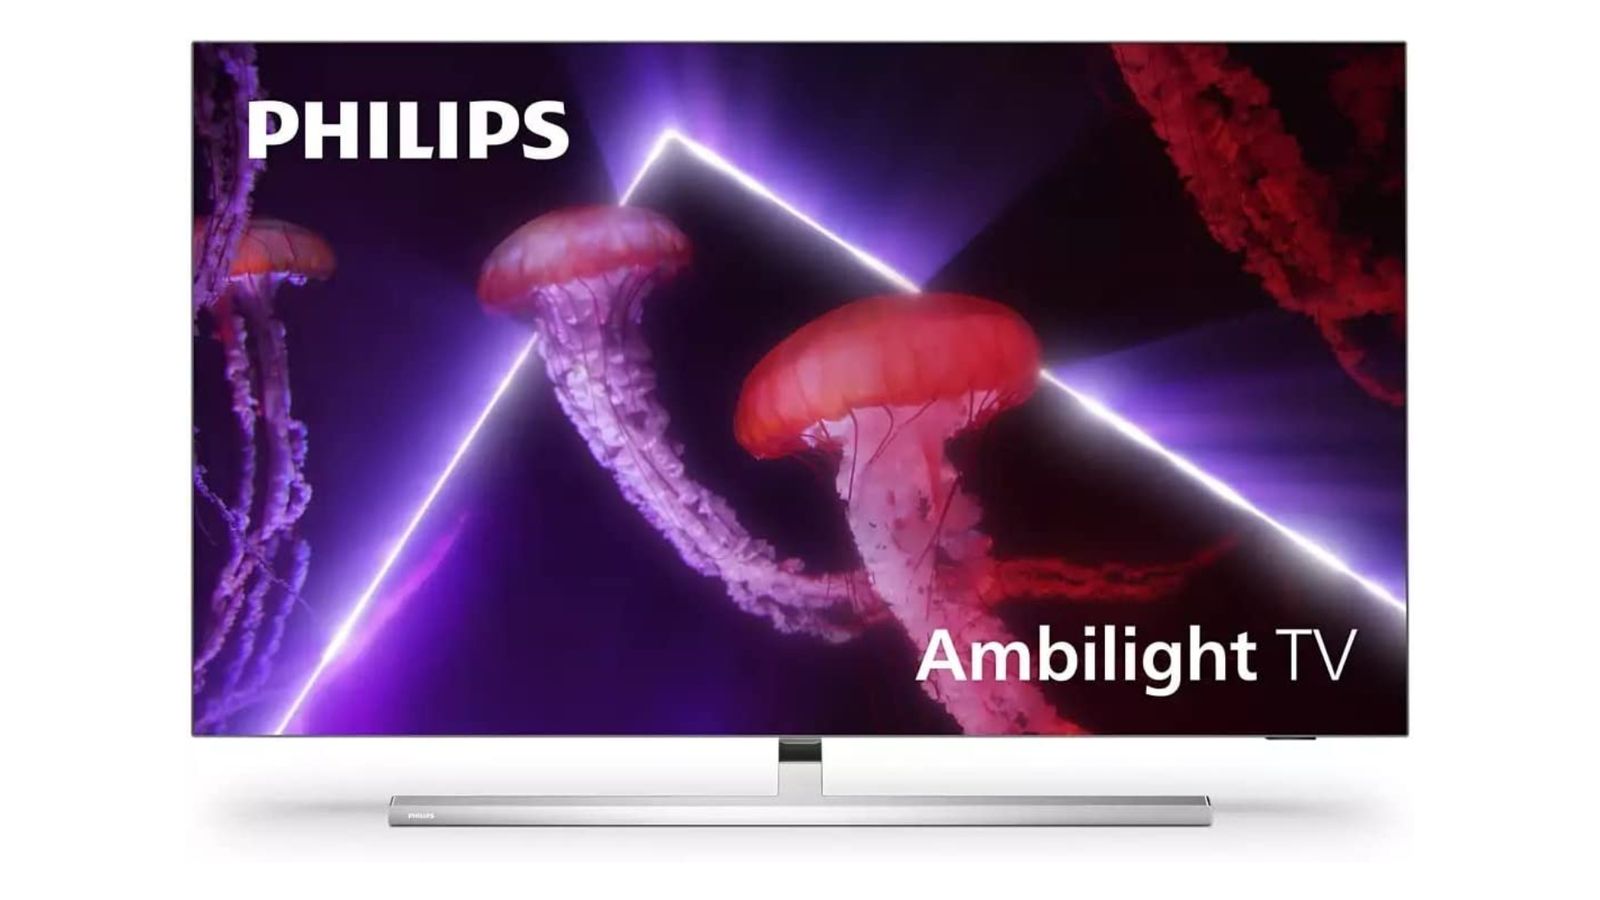 Best OLED TV - Philips 48OLED807 product image of a silver-framed TV with pink jellyfish on the display in front of a purple light.